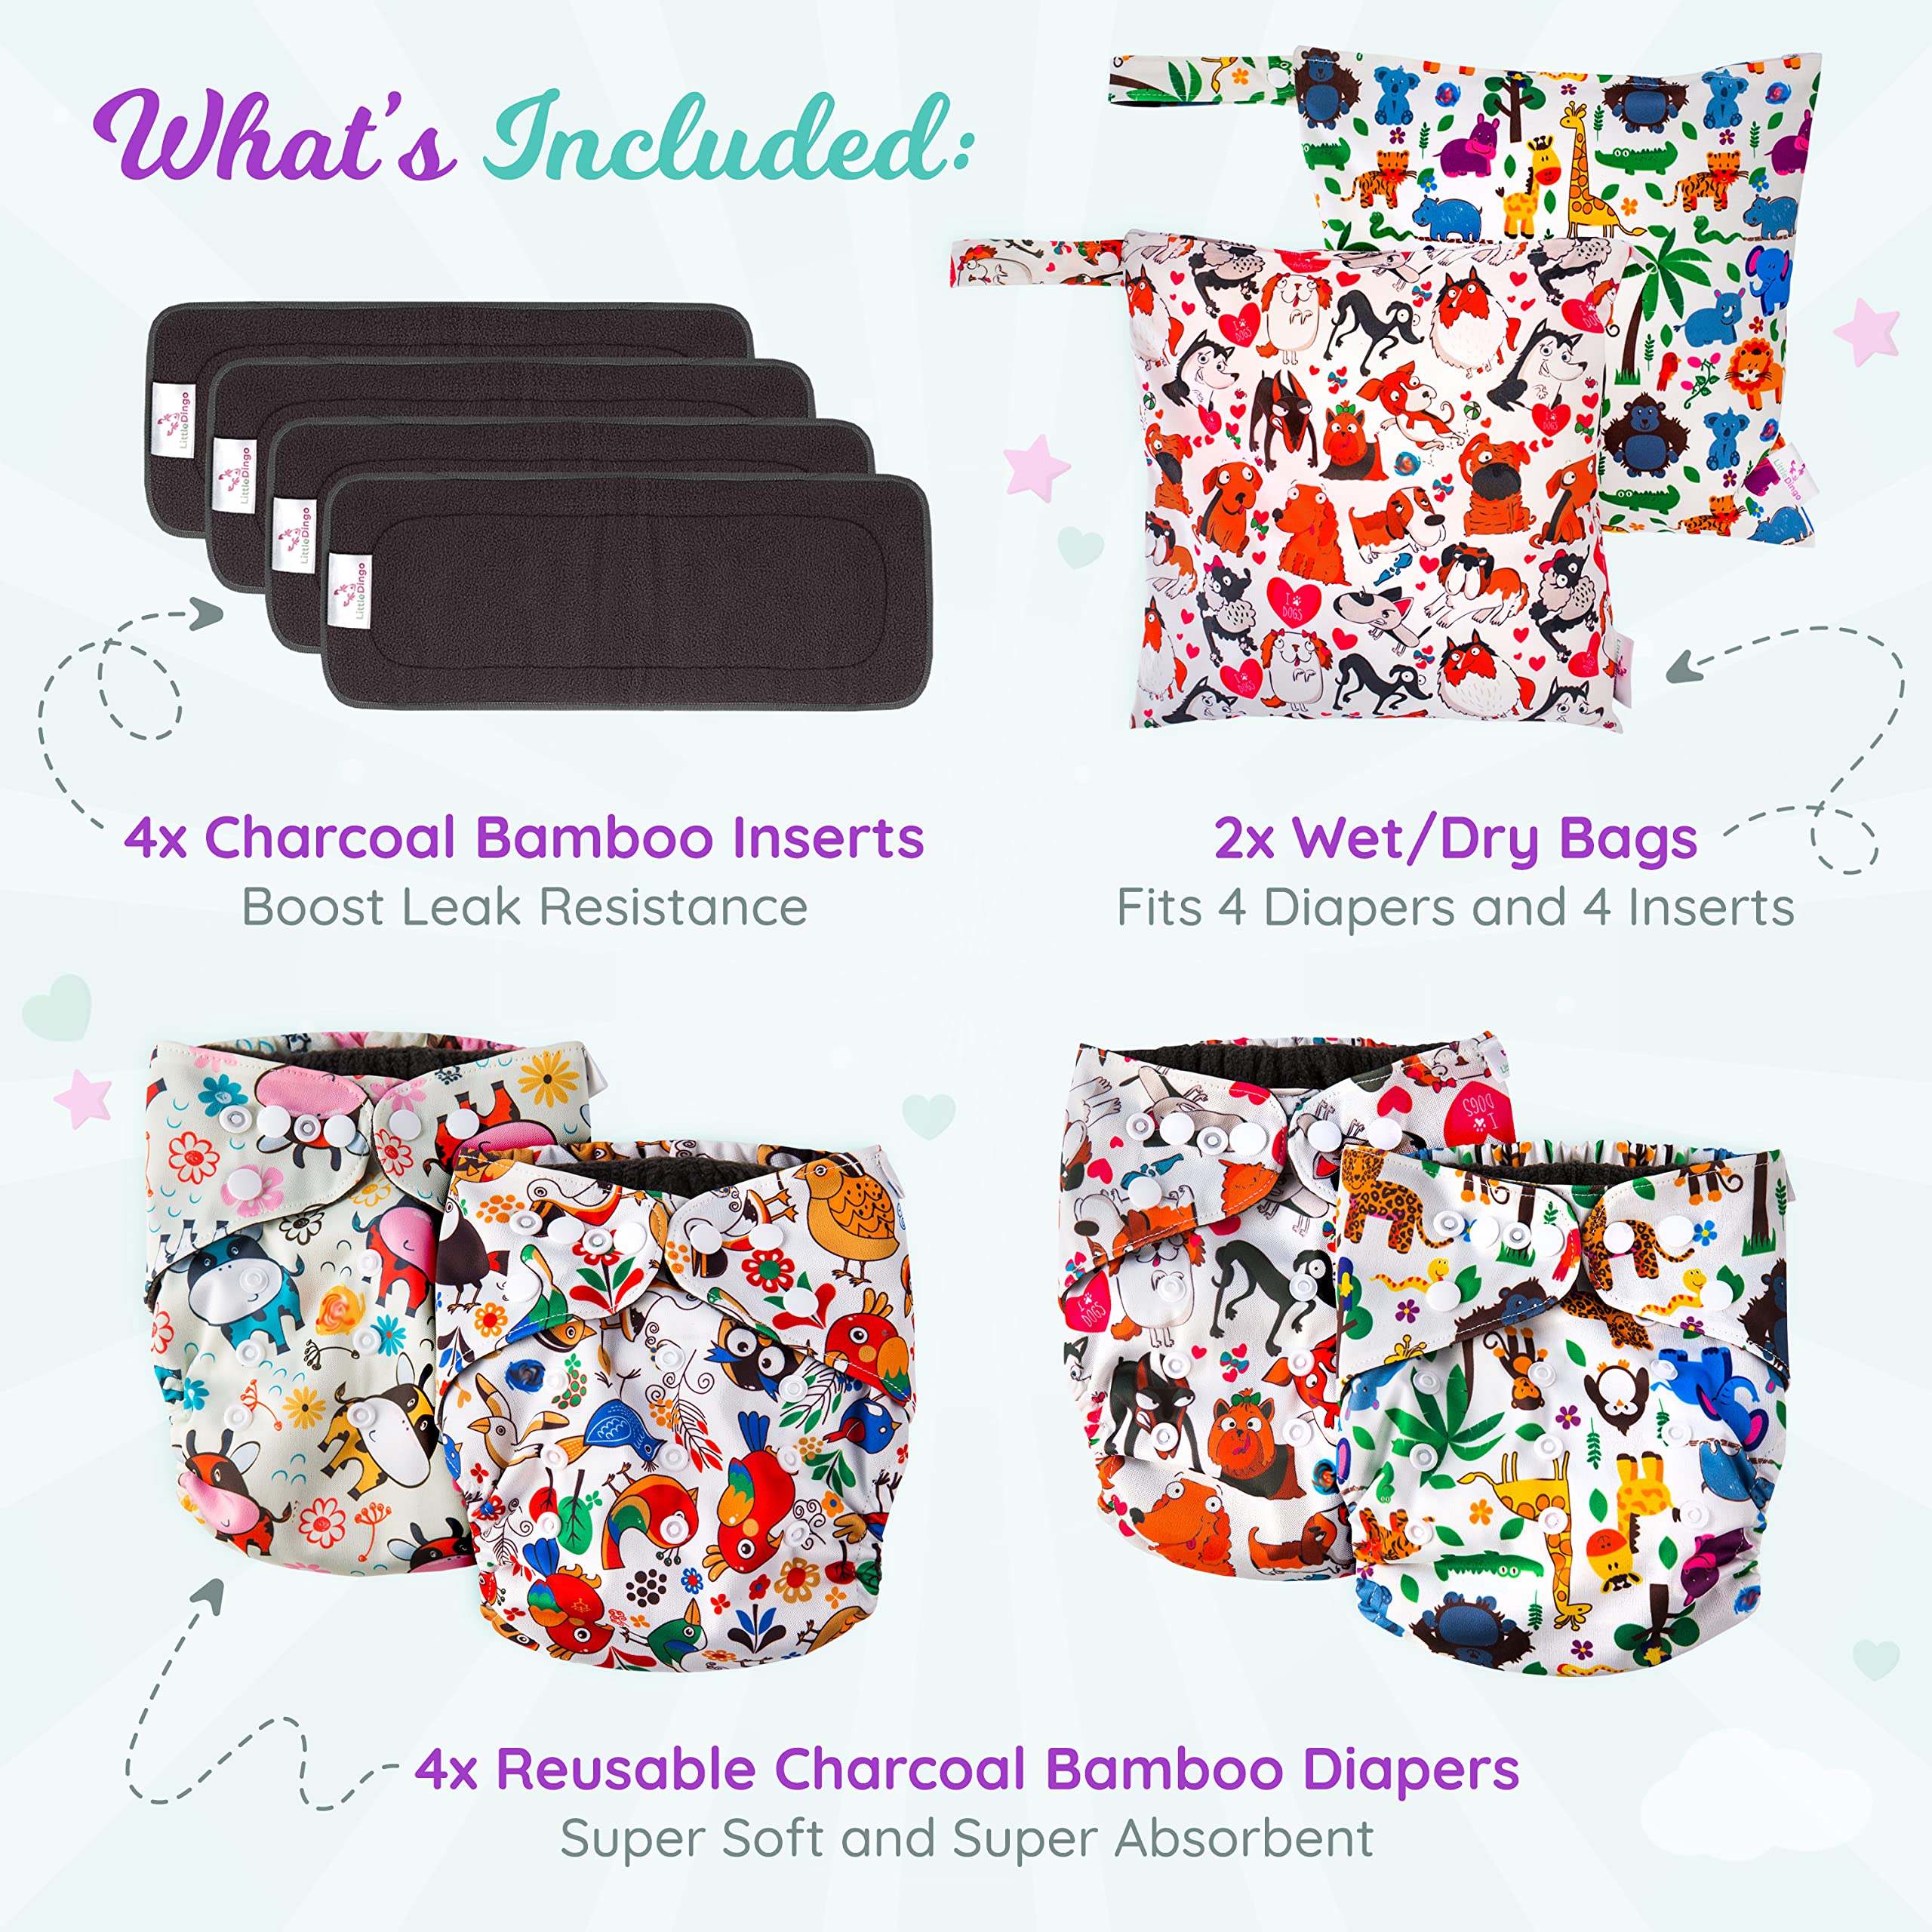 LittleDingo Reusable Cloth Diapers for Babies and Toddlers - 4 Reusable Charcoal Bamboo Diapers + 4 Charcoal Bamboo Inserts and 2 Reusable Diapers Wet Bags